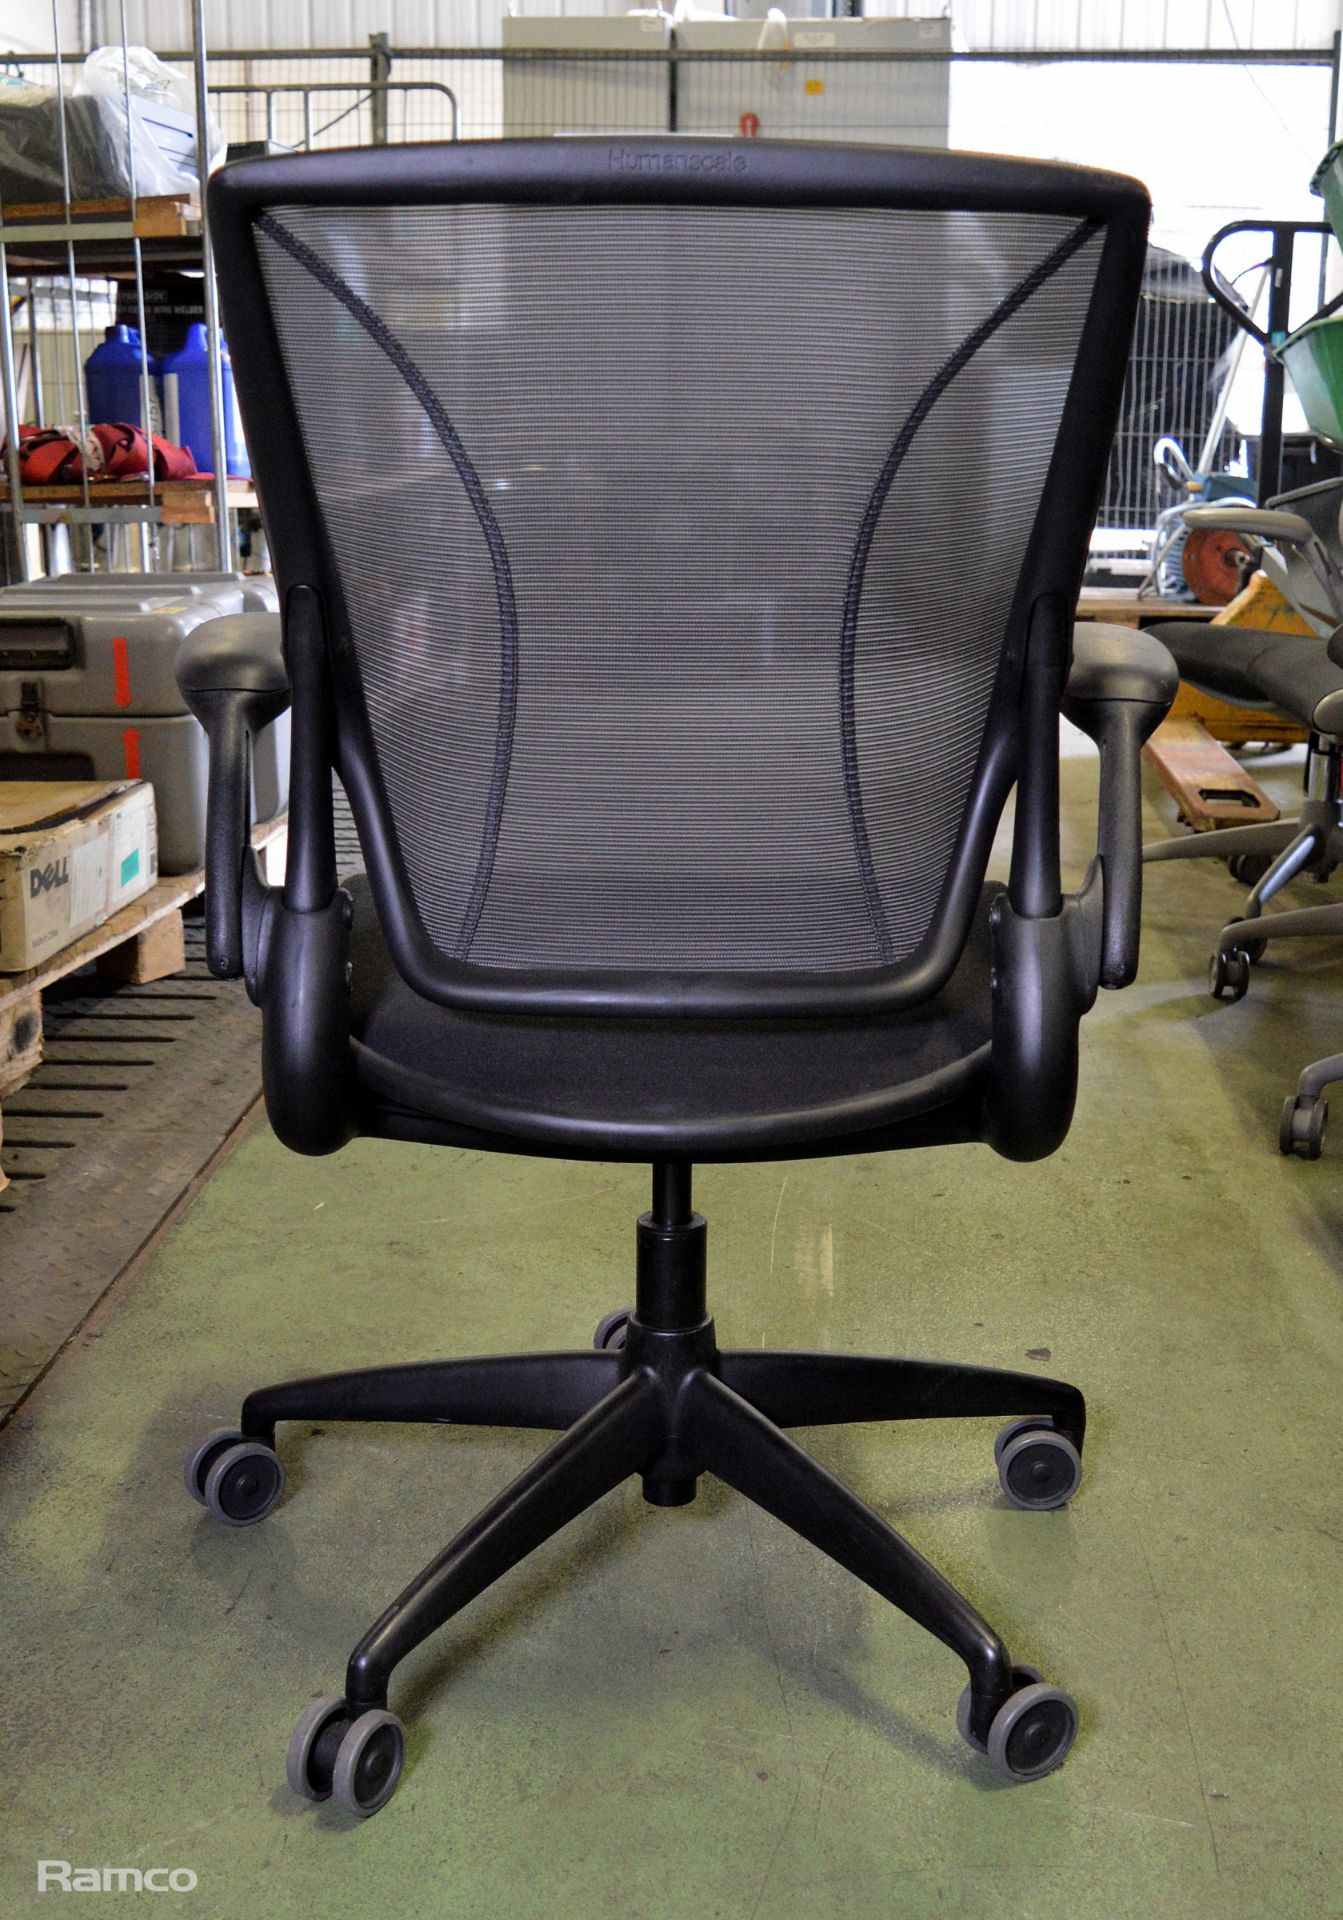 HumanScale Ergonomic Office Chair - black - Image 3 of 3